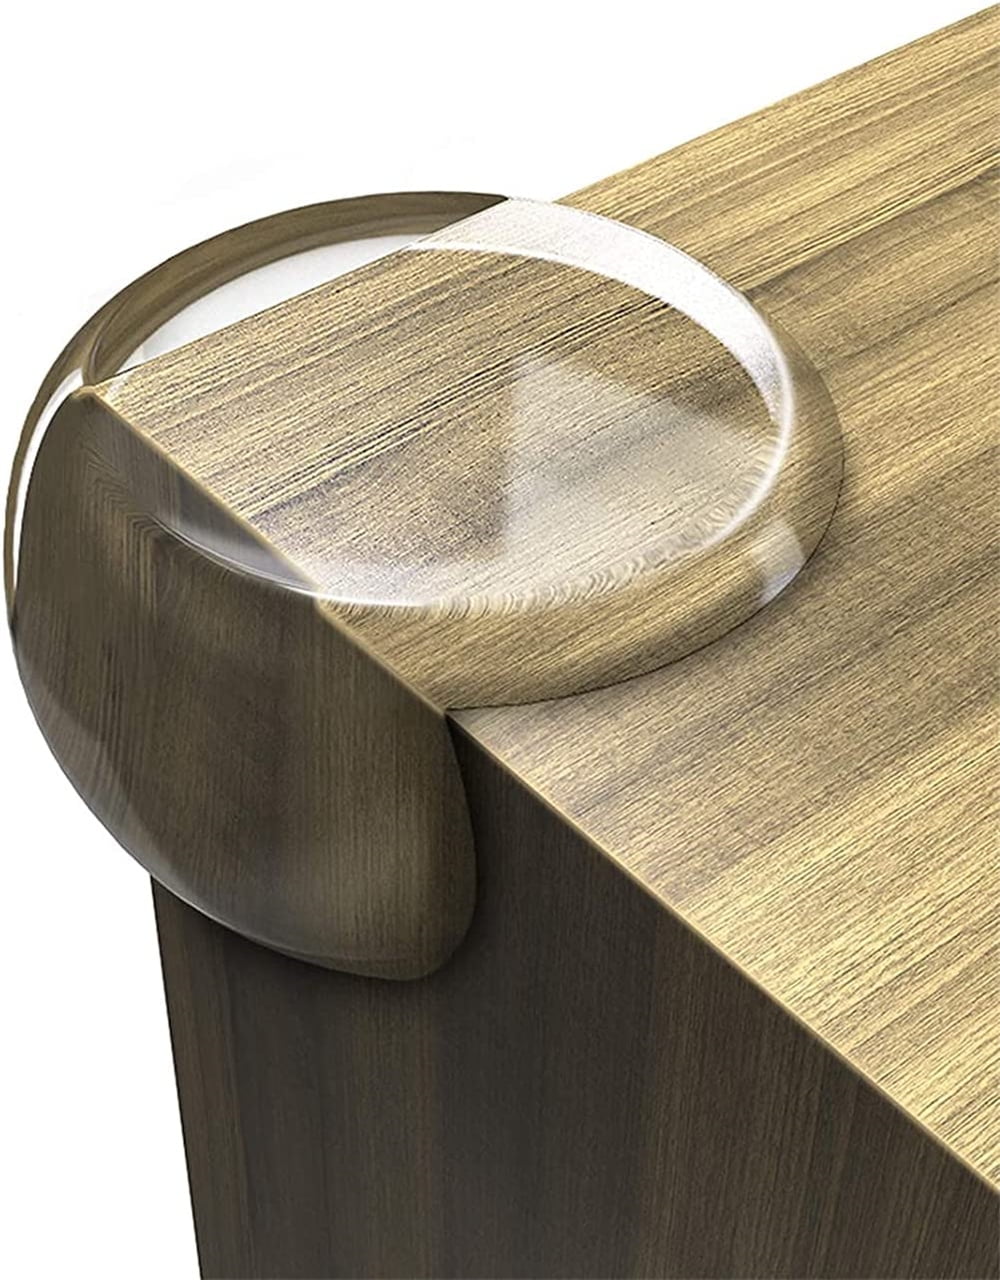 Details about Solid Brass Table Corner Protectors, Solid brass